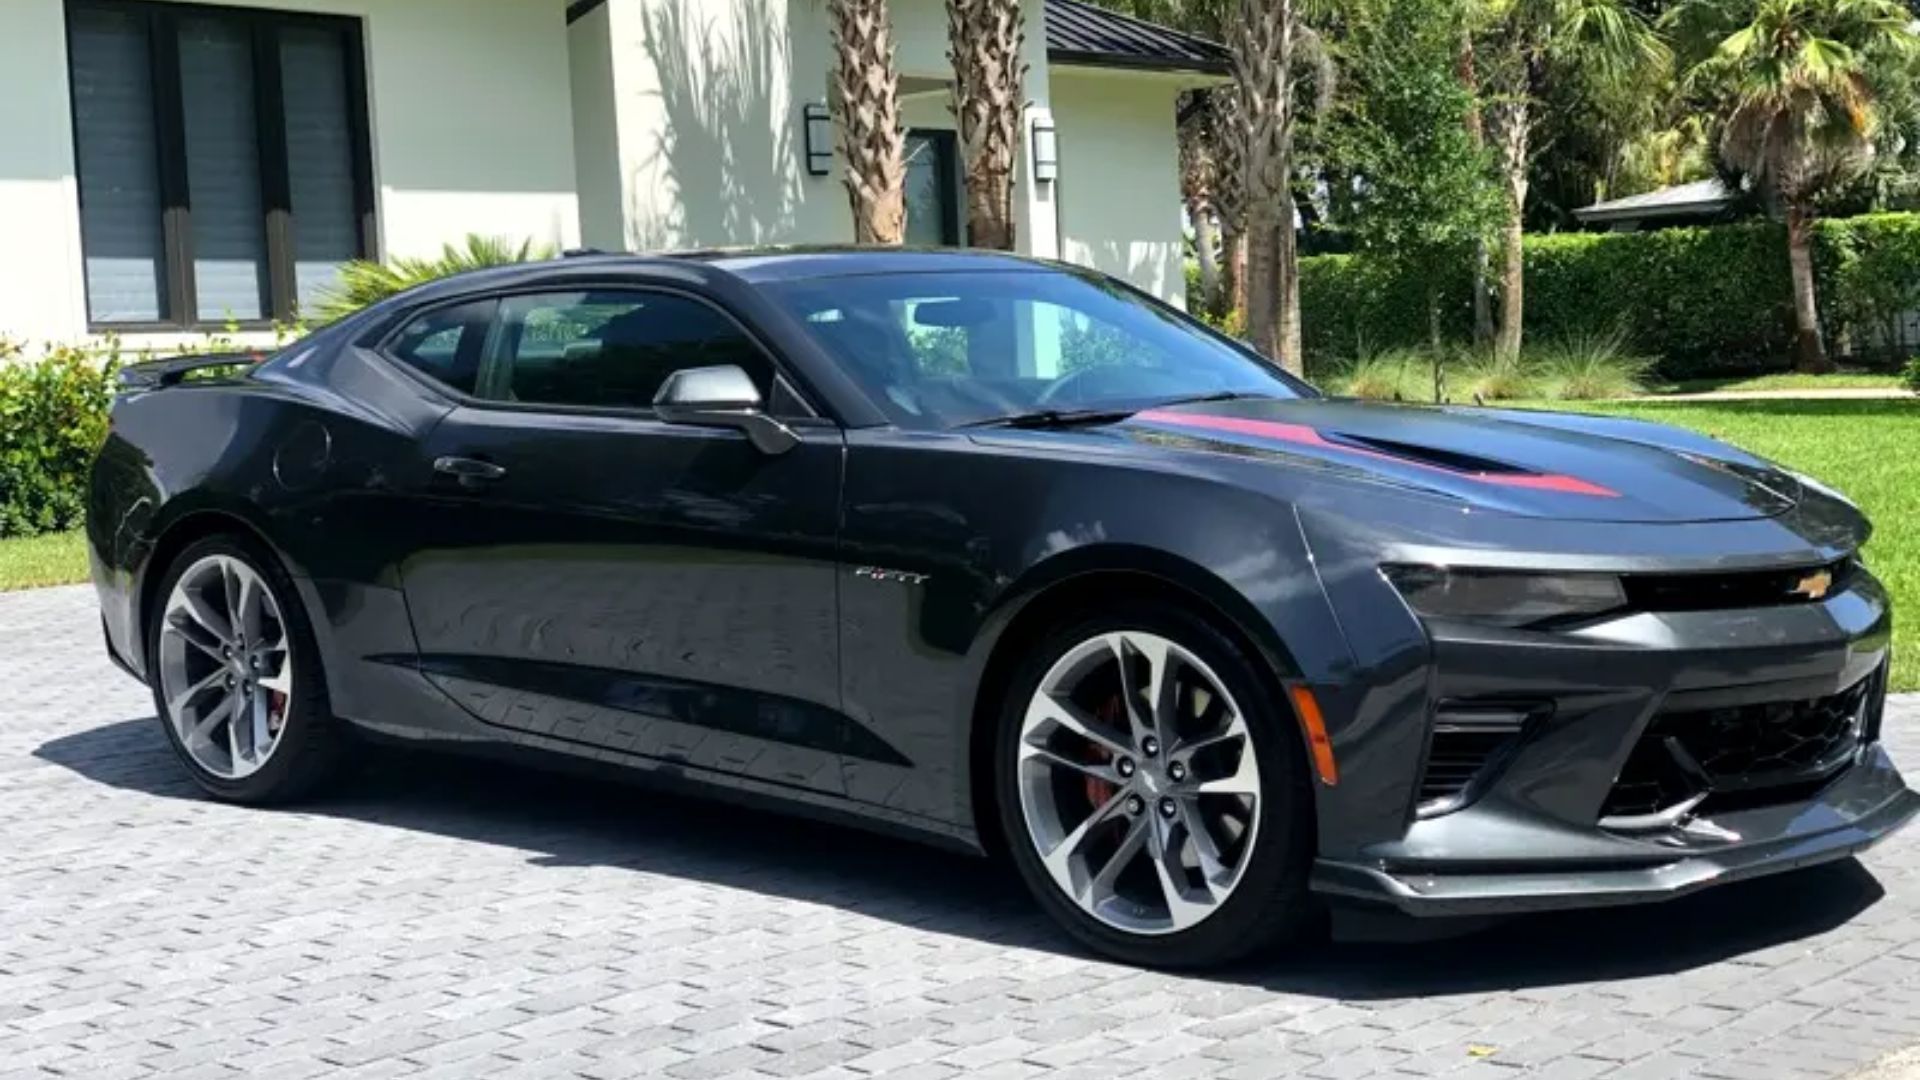 2017 Chevy Camaro 2SS Coupe 50th Anniversary Edition Celebrates A Legend